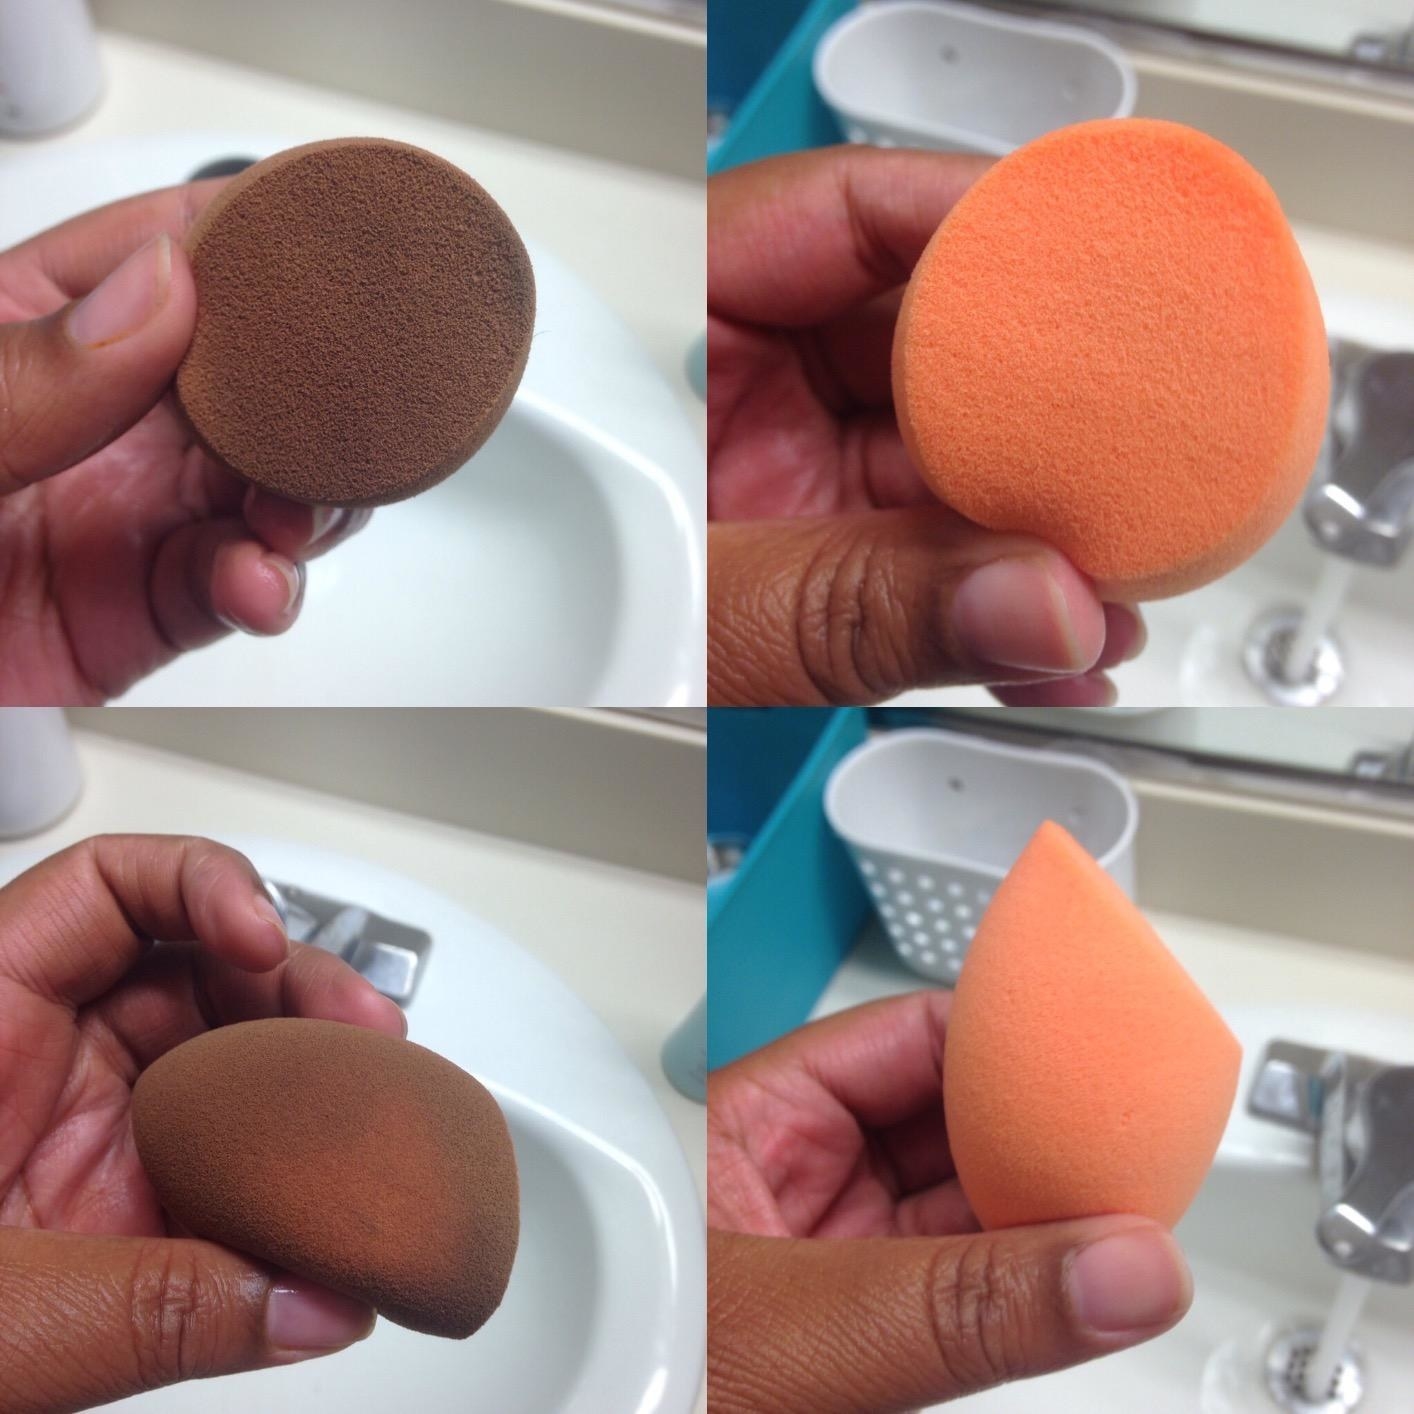 Reviewer&#x27;s beauty blender covered in makeup and brown, and the same beauty blender, restored to it&#x27;s original light orange color after being washed with the shampoo